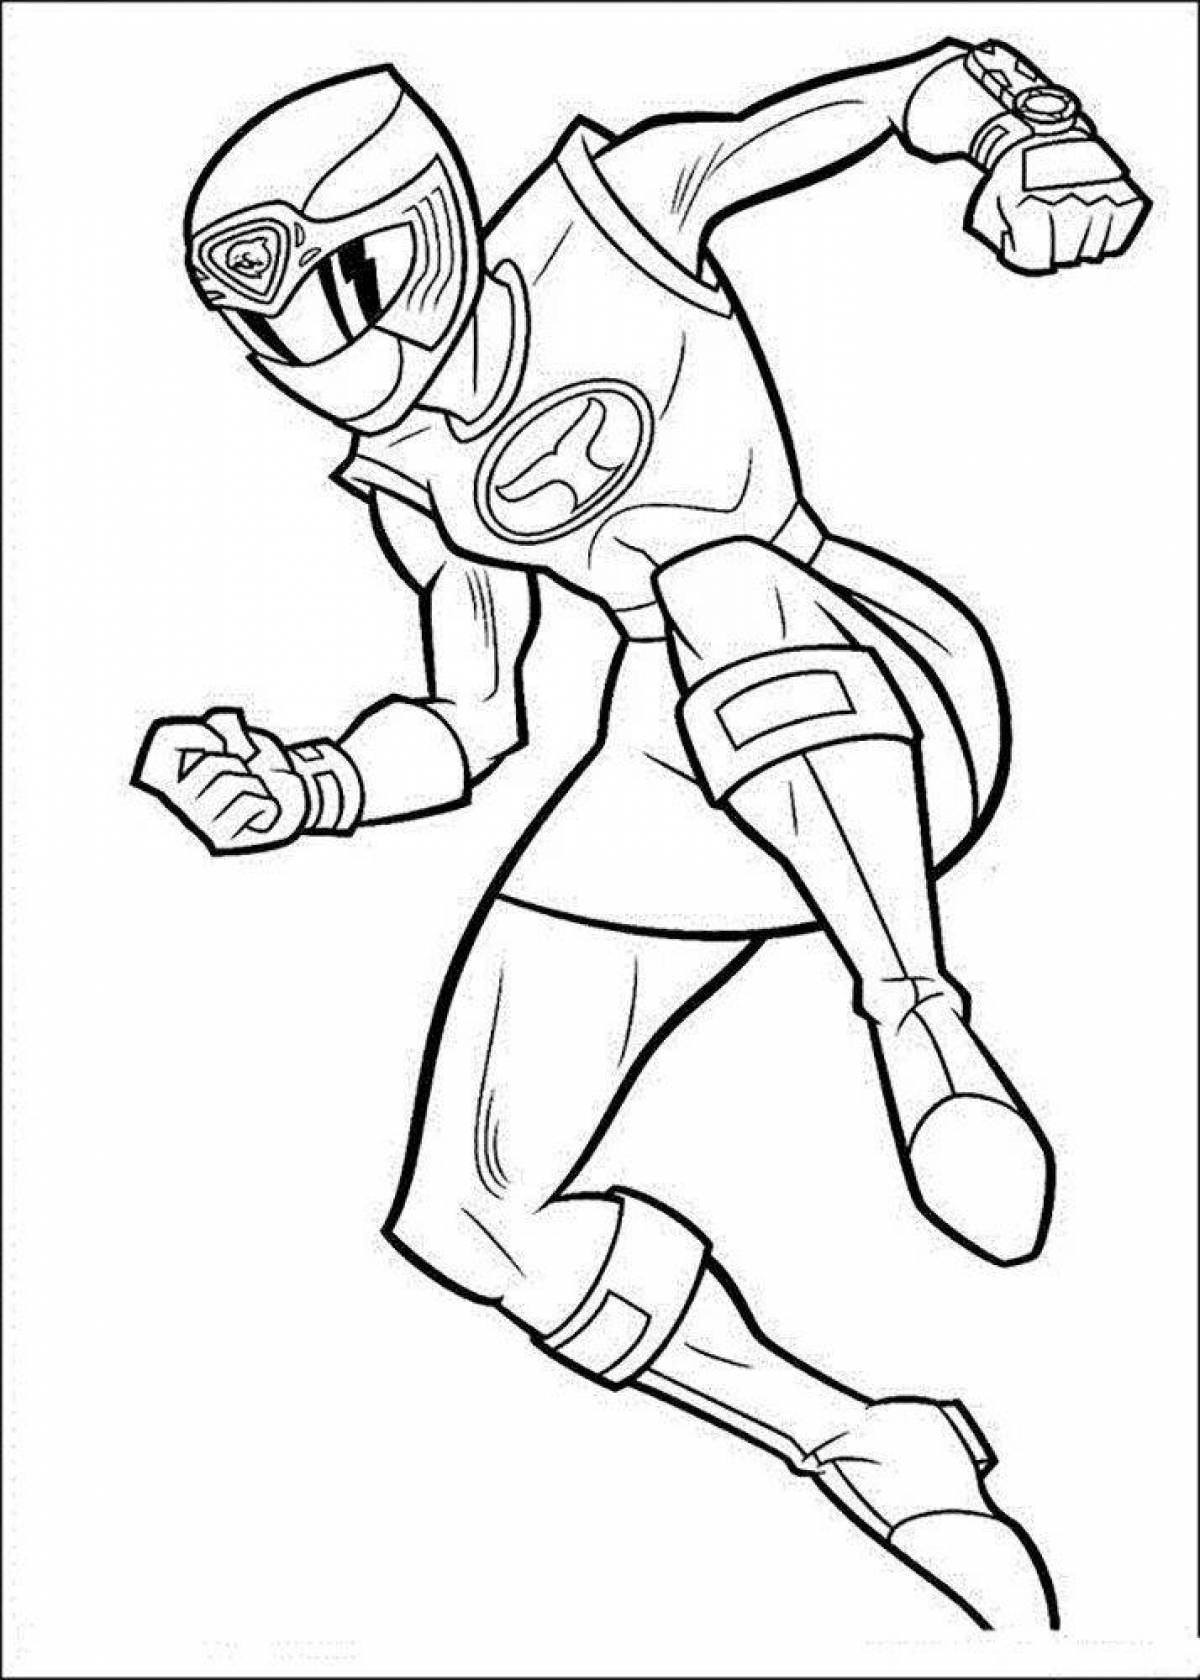 Charming power rangers coloring page